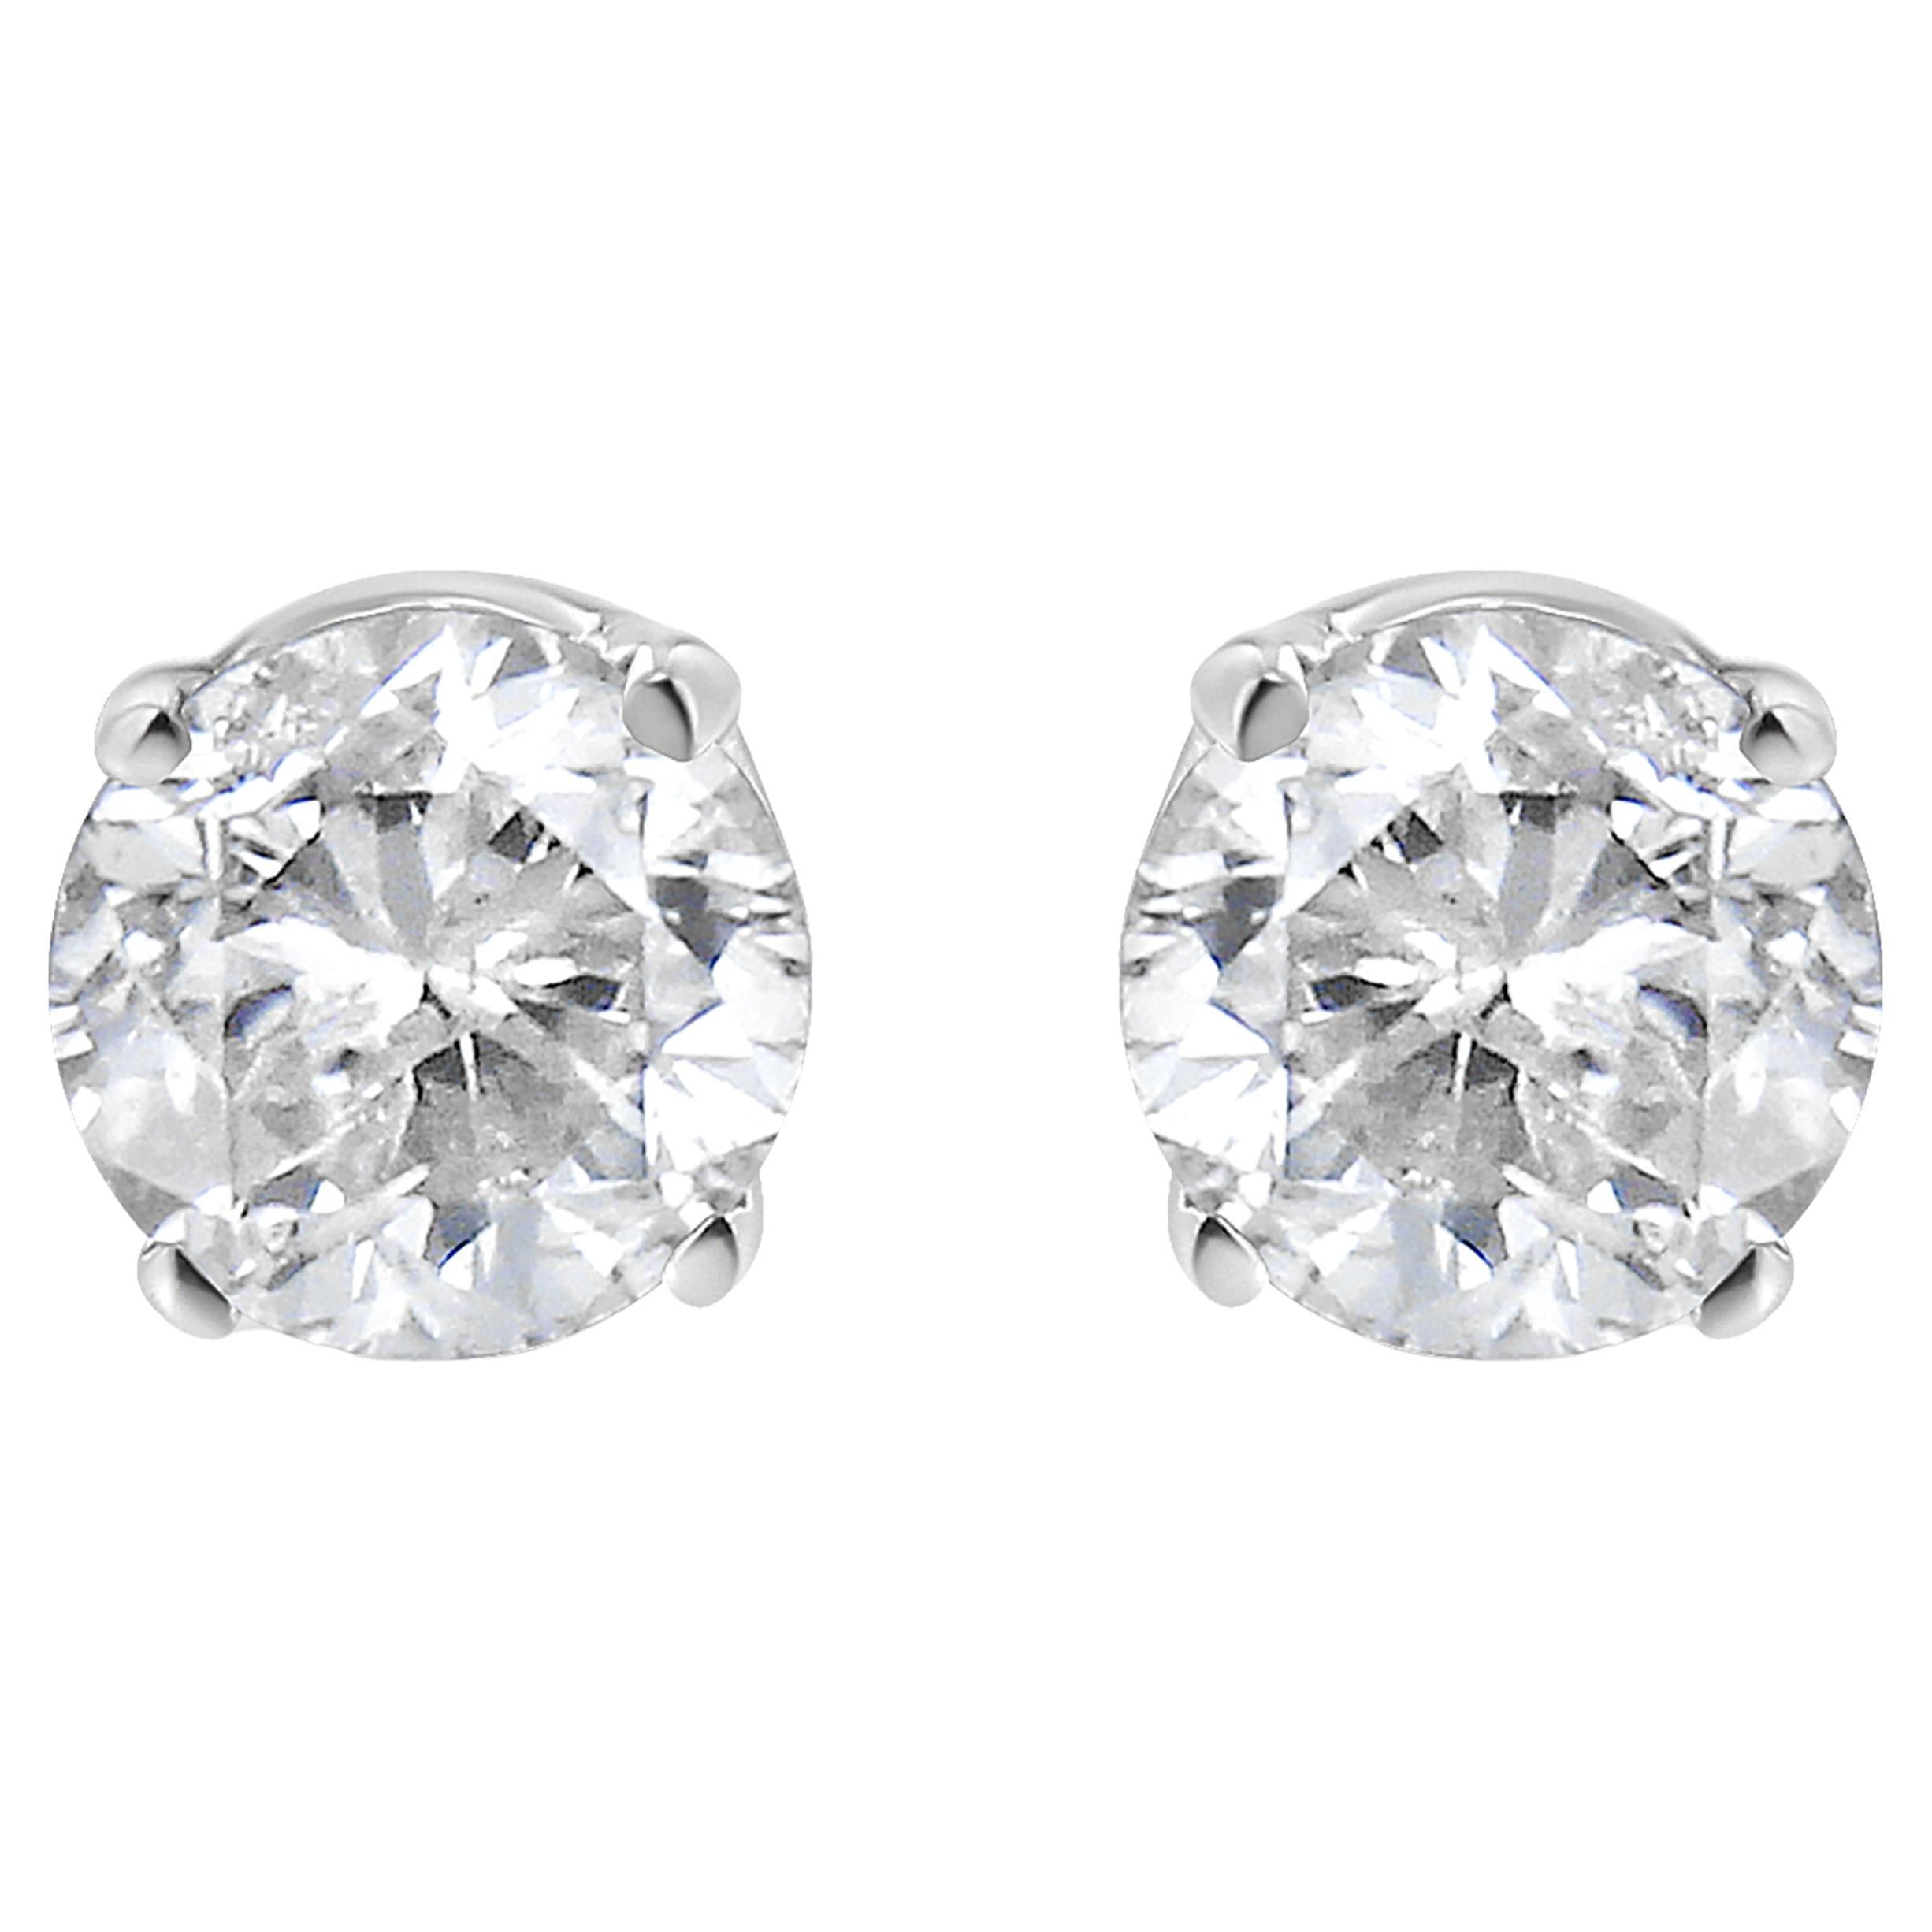 AGS Certified 14K White Gold 1.0 Carat Solitaire Diamond Push Back Stud Earrings For Sale